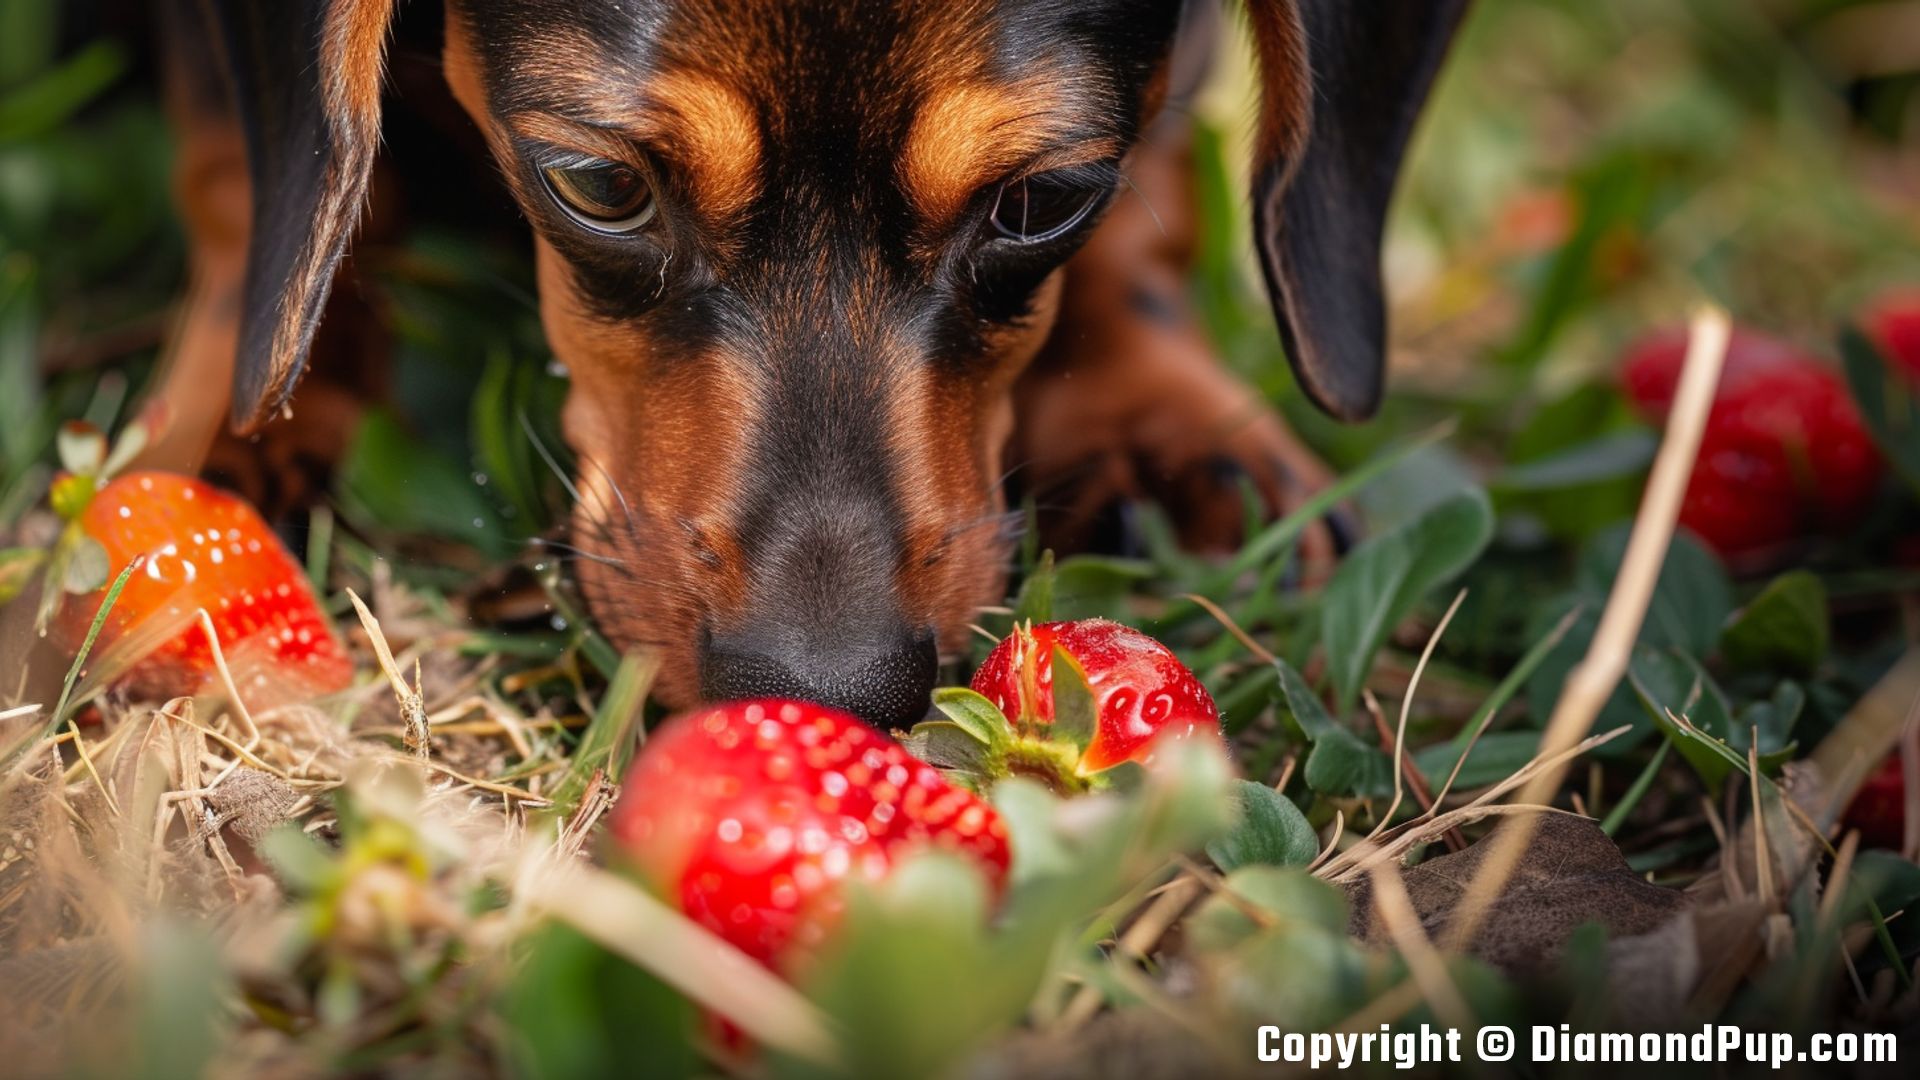 Image of a Cute Dachshund Snacking on Strawberries